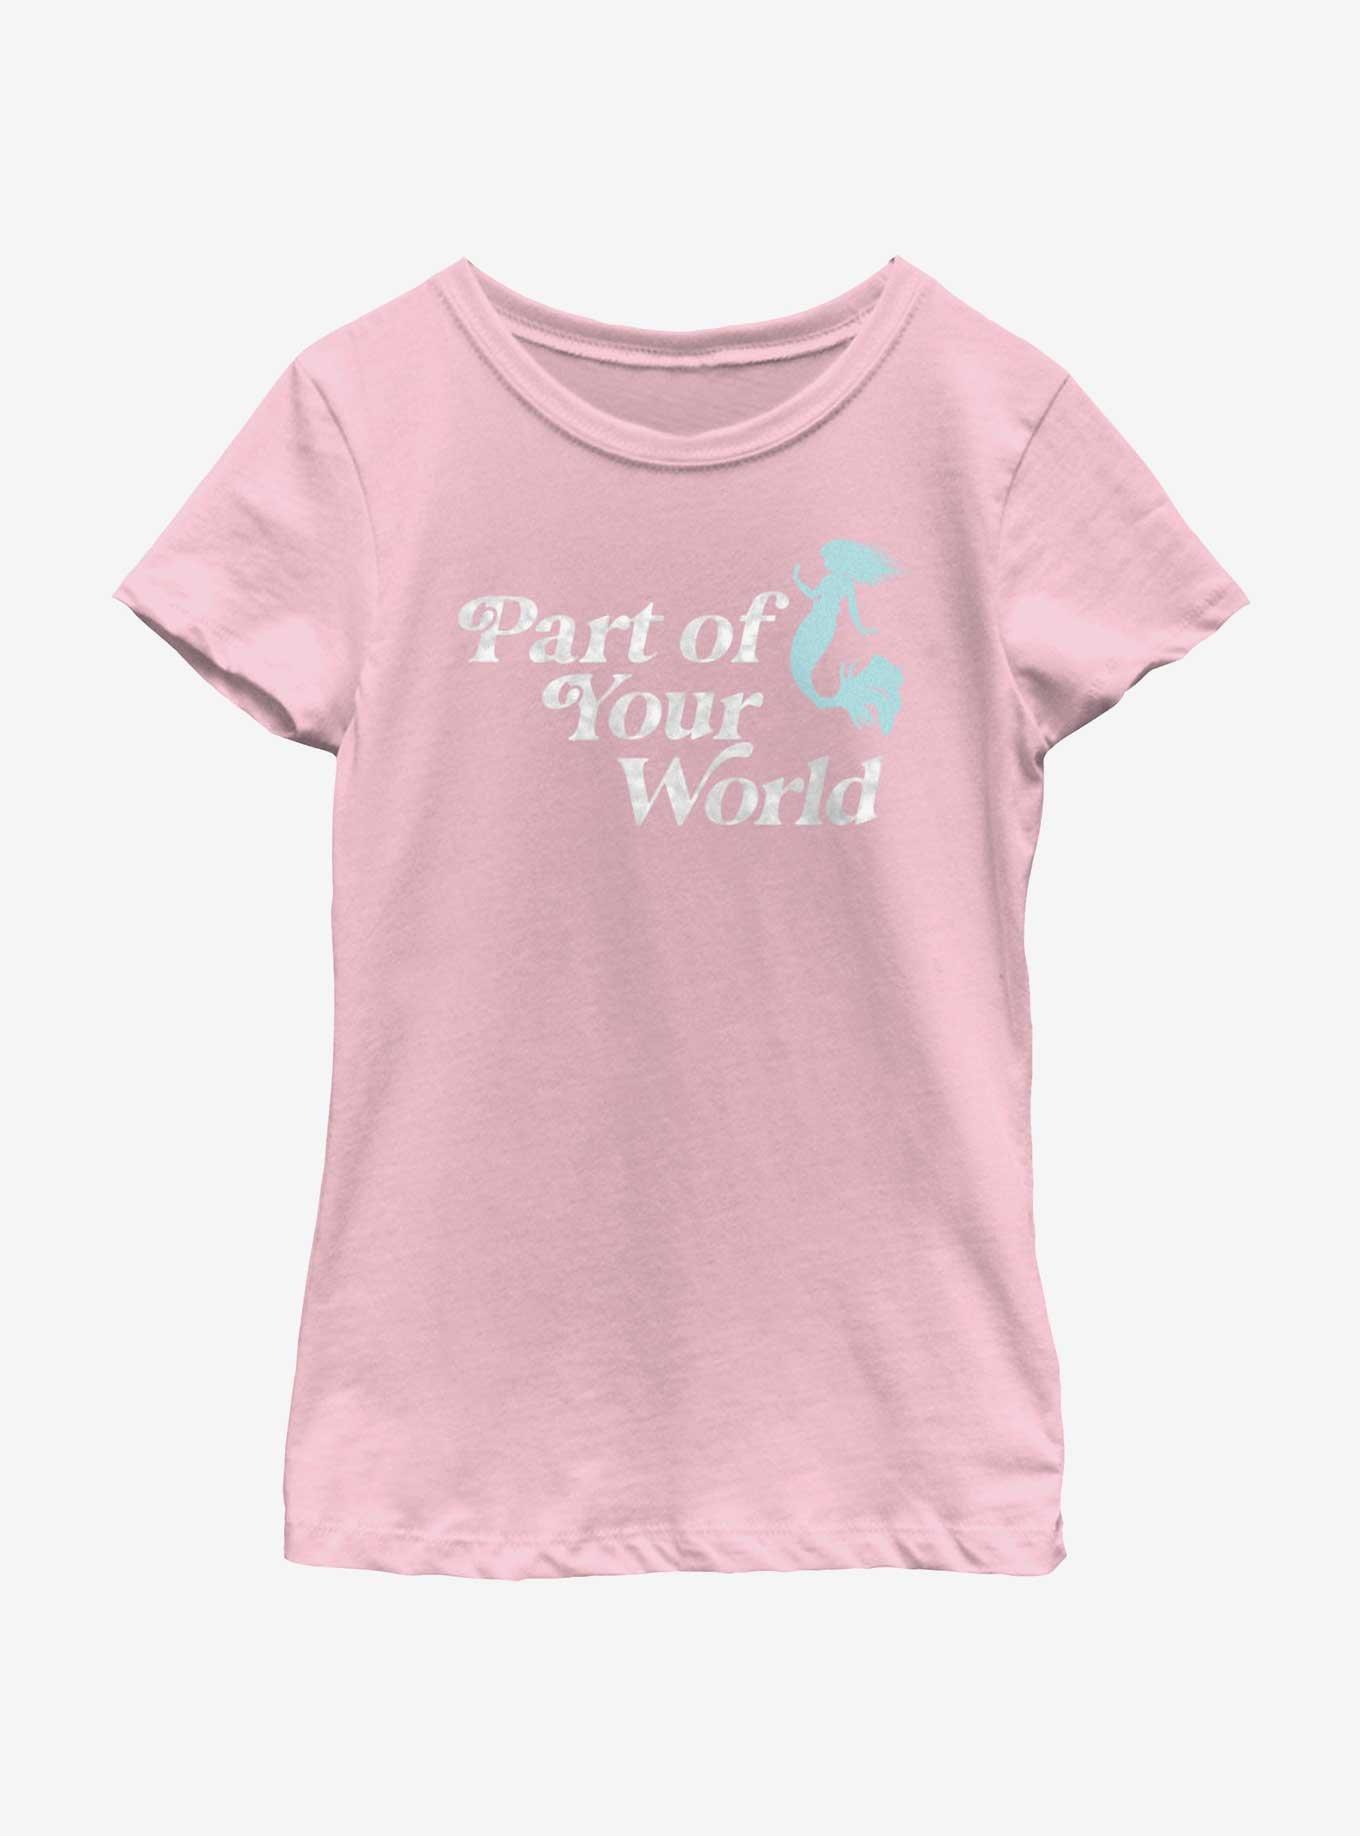 Disney The Little Mermaid Live Action Part of Your World Youth Girls T-Shirt, PINK, hi-res